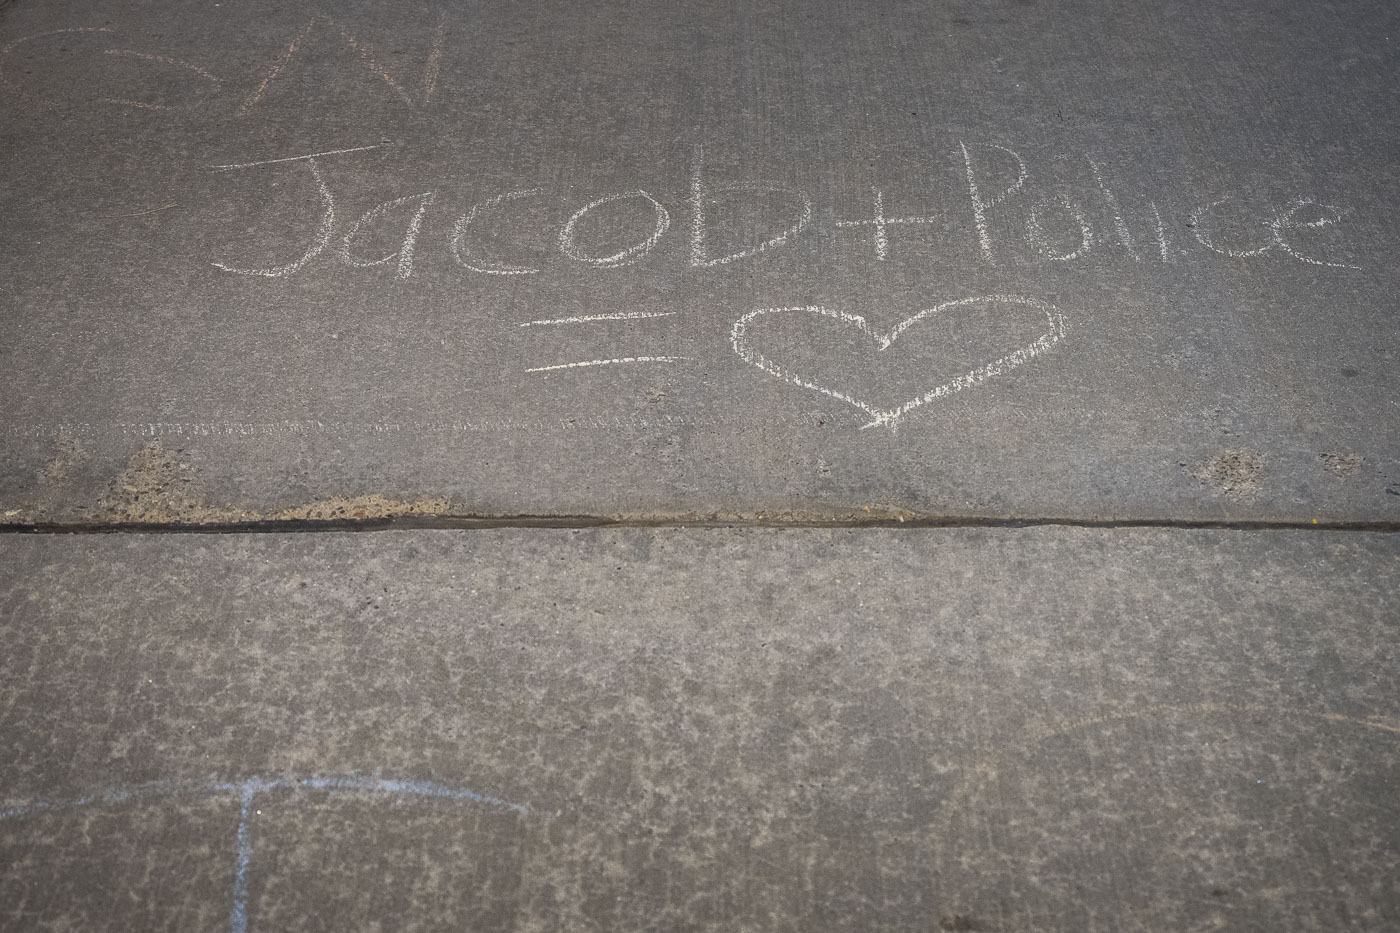 Chalk on the sidewalk outside the mayors home